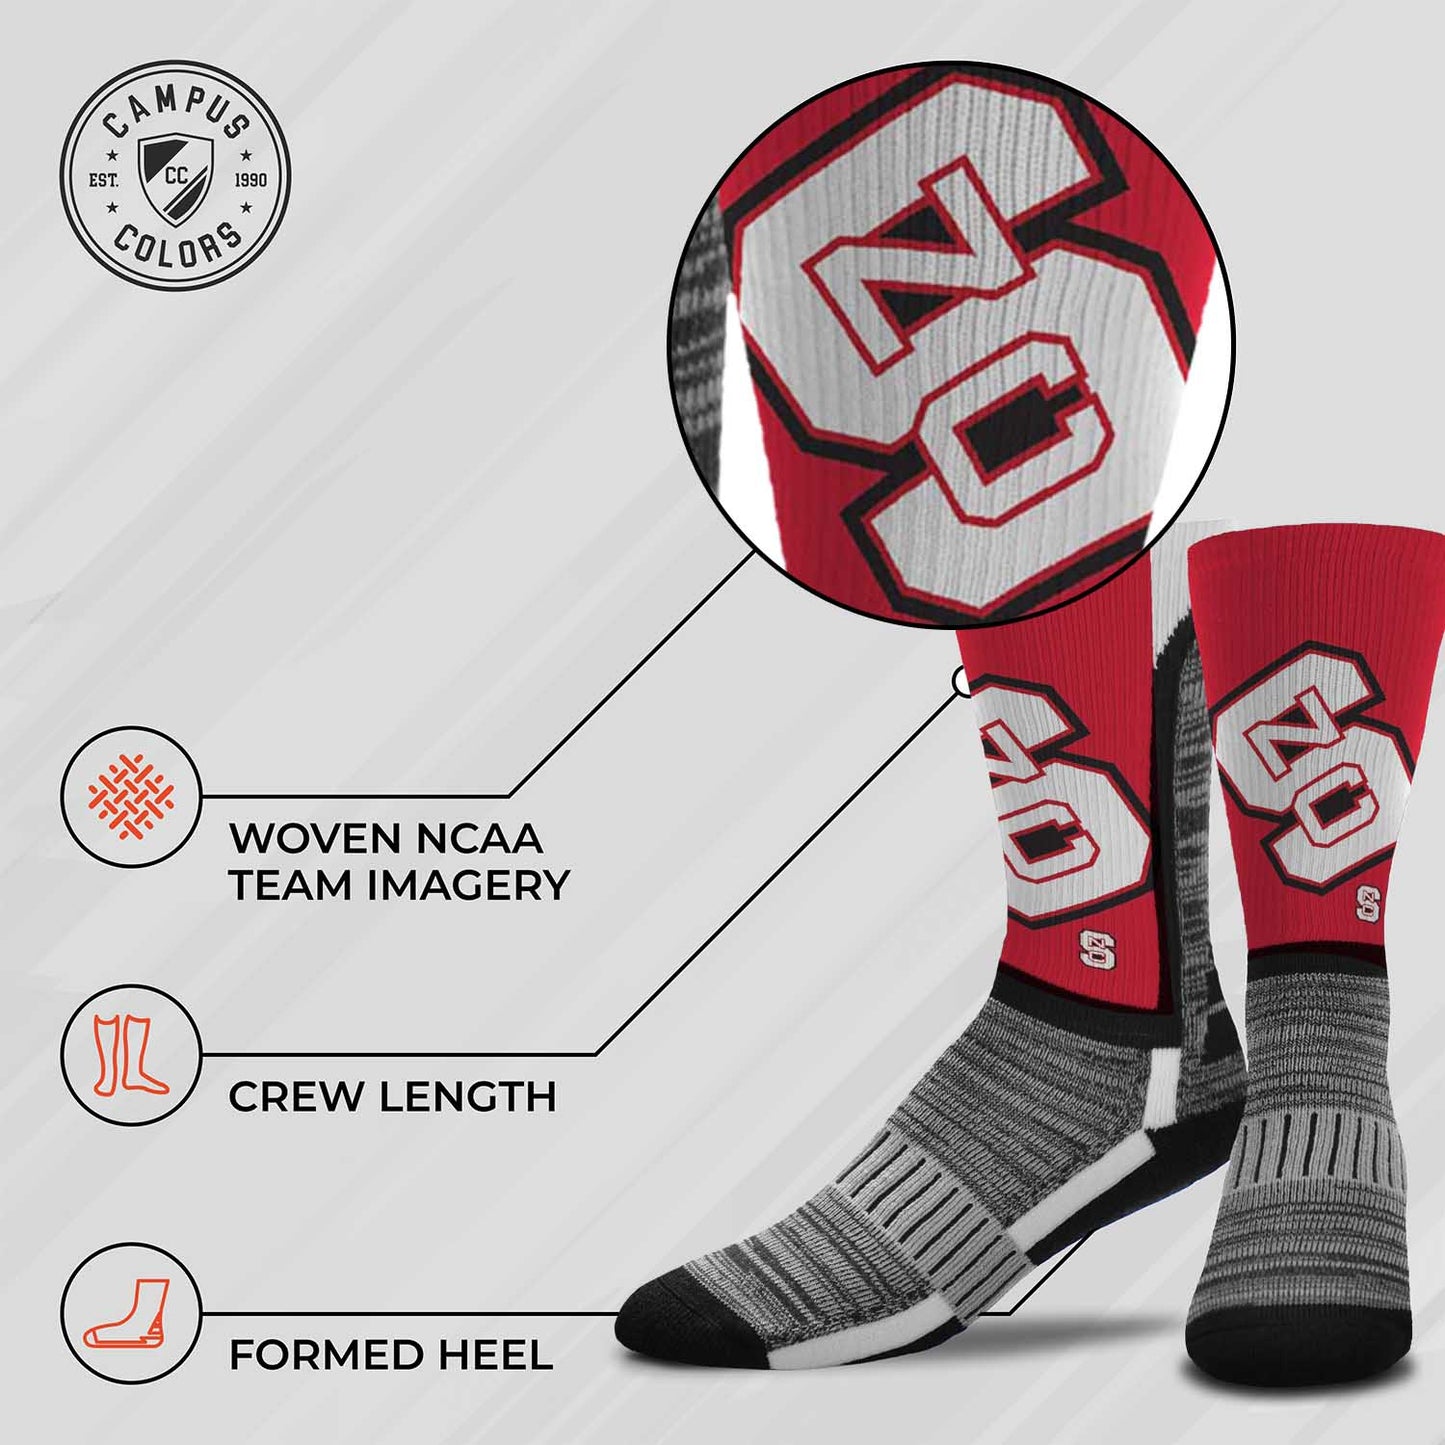 NC State Wolfpack Adult State and University Socks - Red